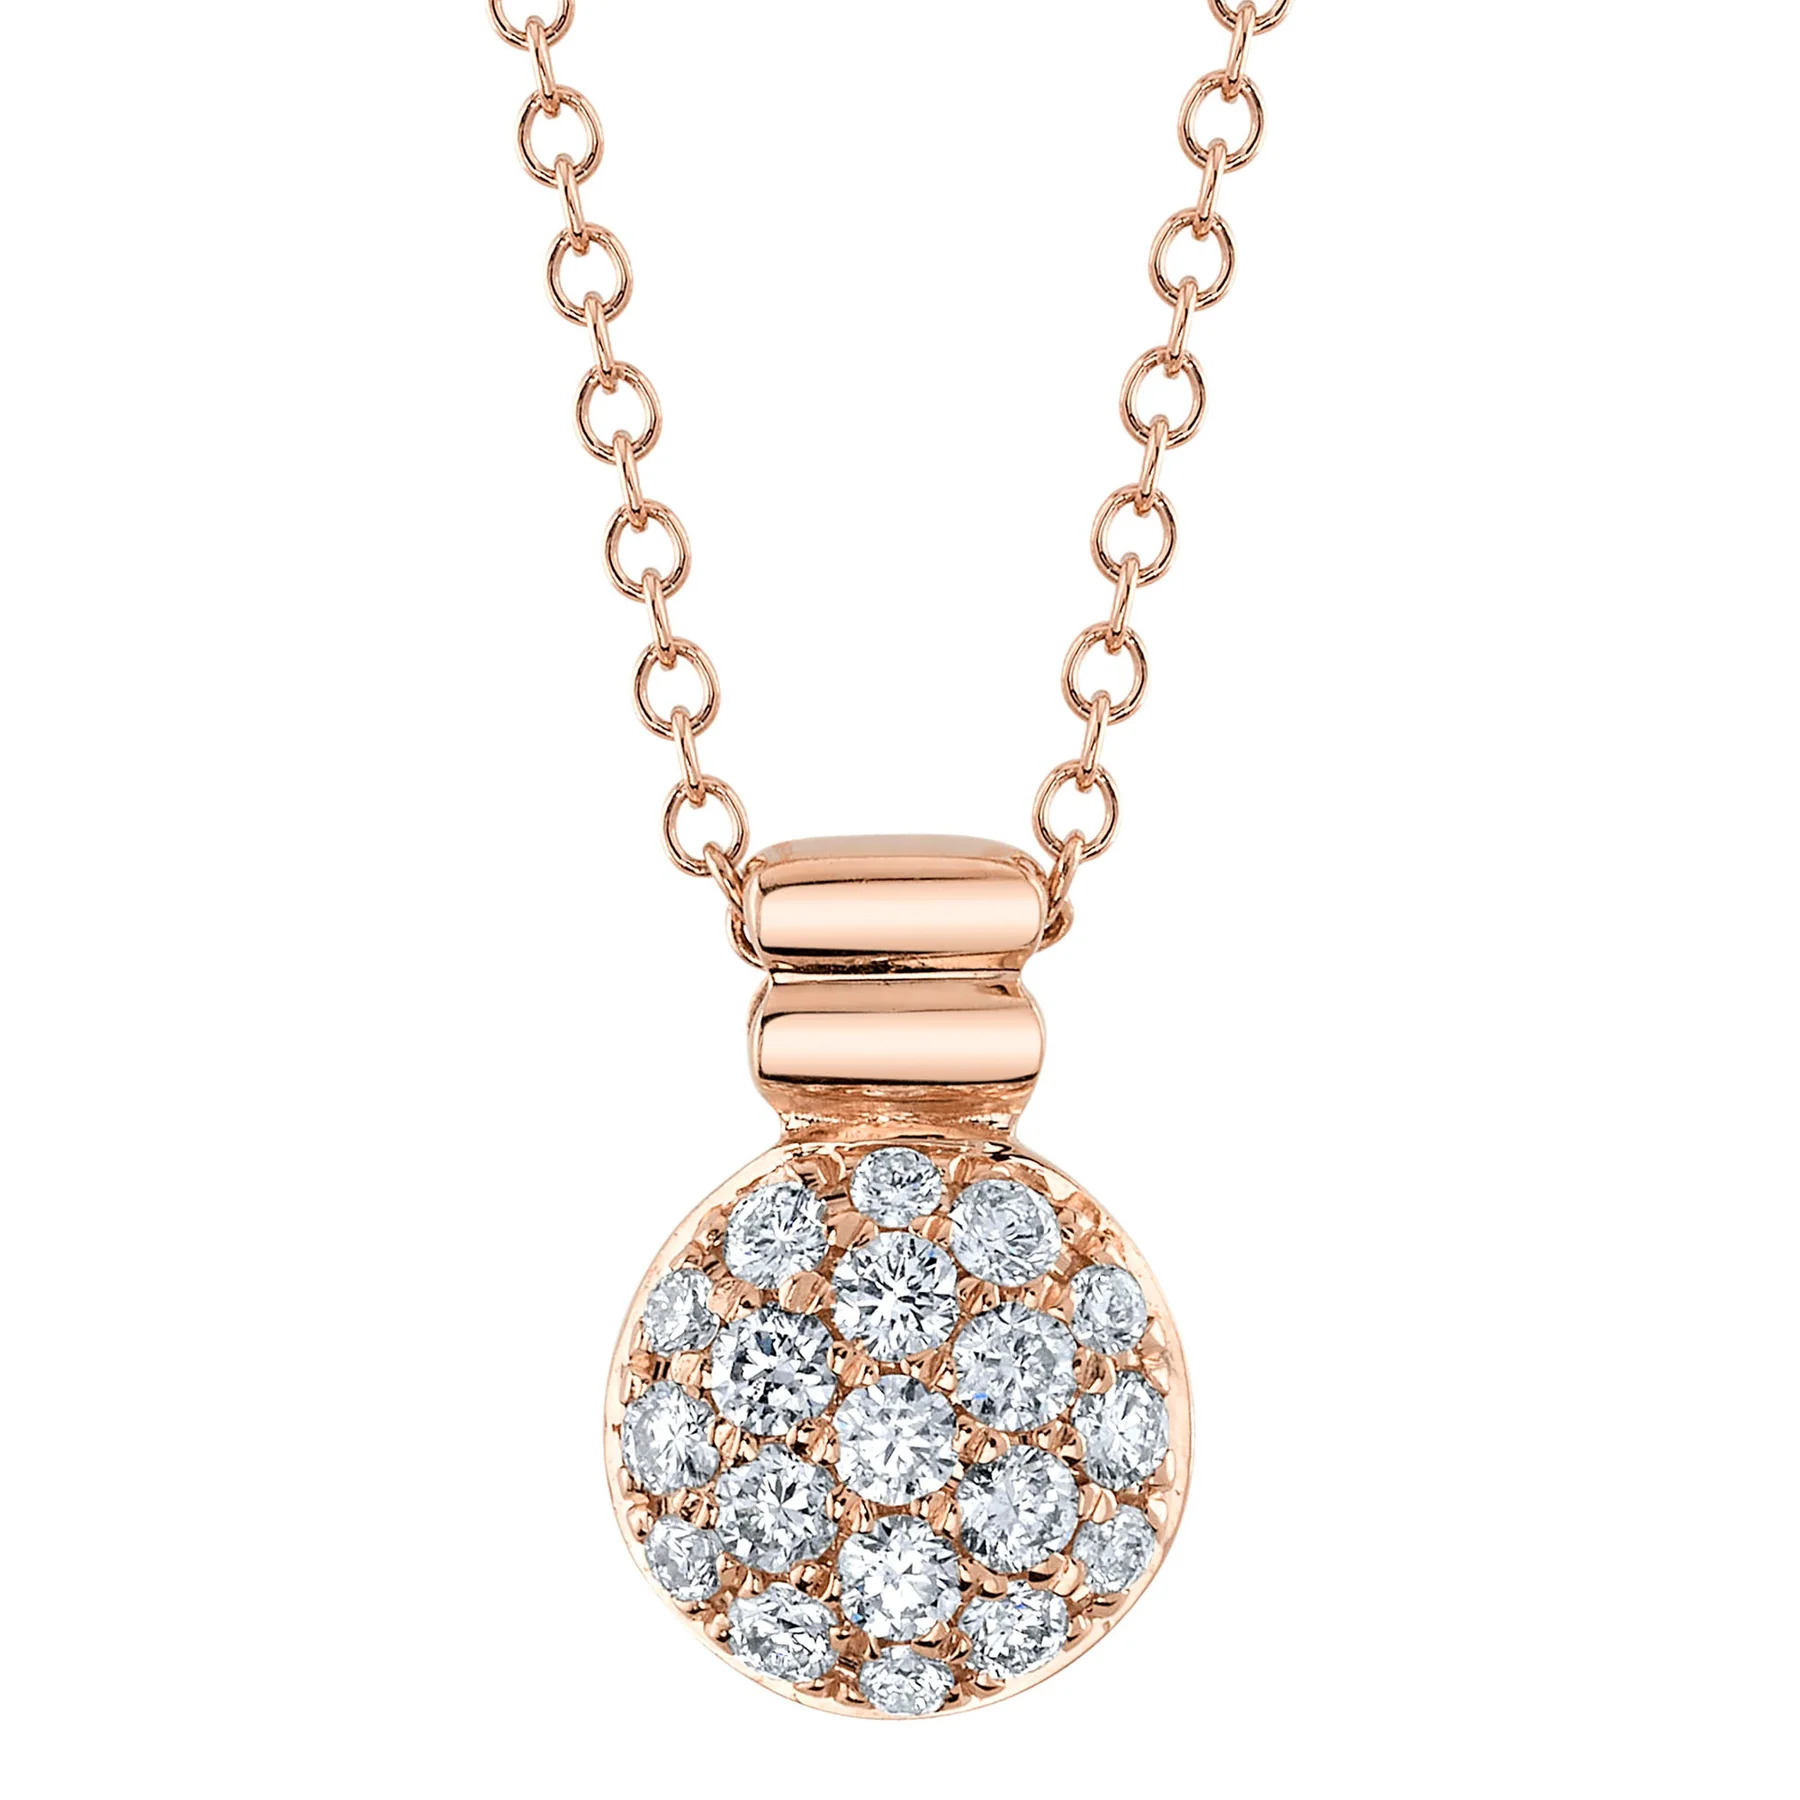 One rose gold necklace with a circular pendant. The pendant is adorned with arrangement of pave-set diamond.